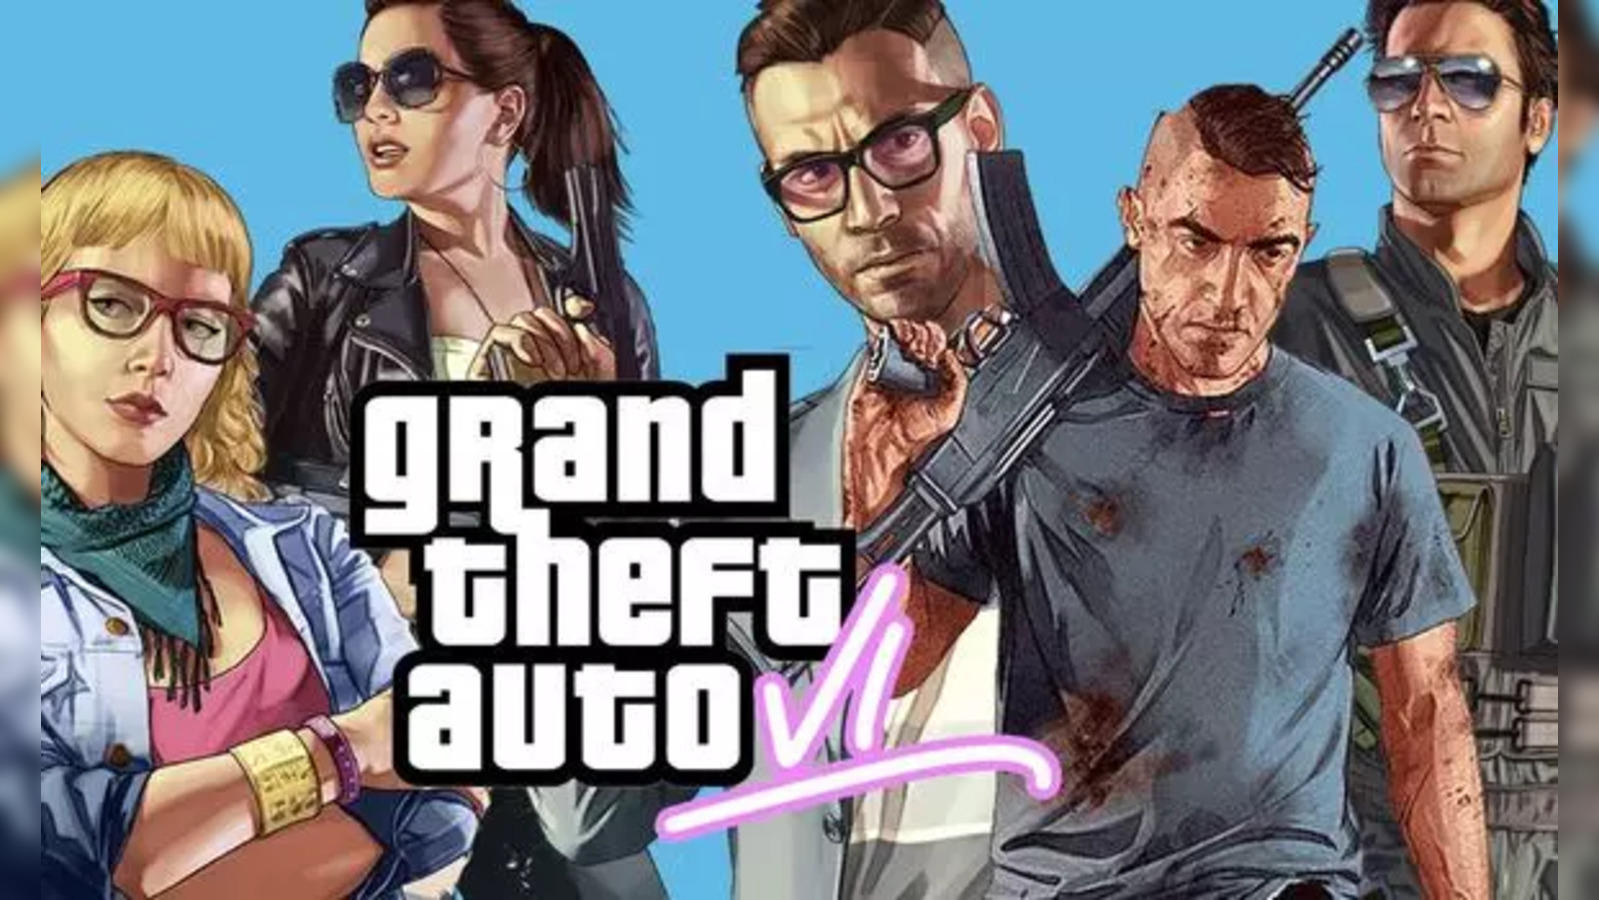 Grand Theft Auto 6 leaked trailer confirms release date